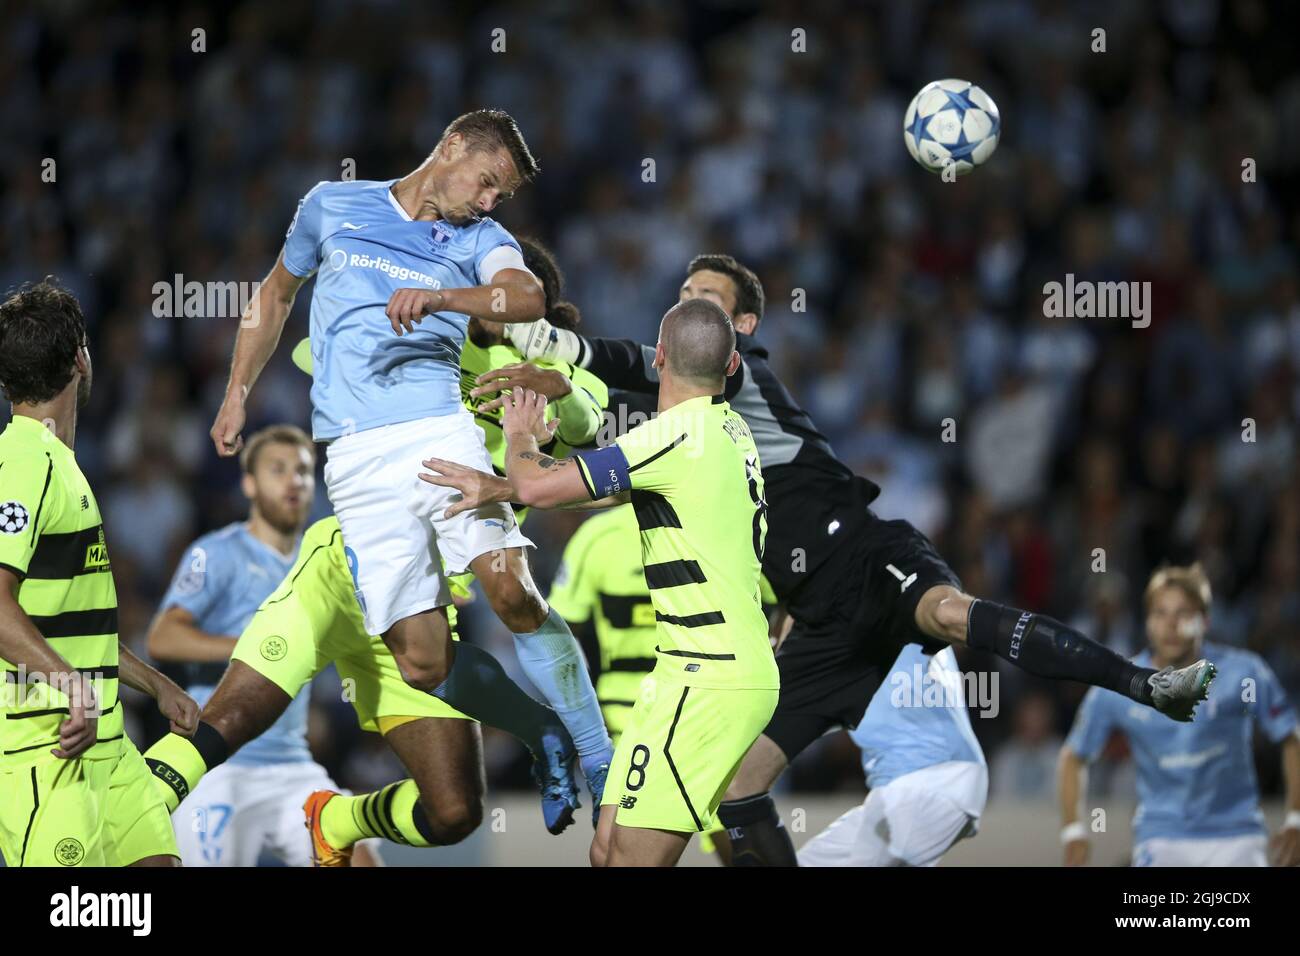 Malmo's Markus Rosenberg (top, center) heads the ball to score the opening goal past Celtics goal keeper Craig Gordon (right) and Celtics Scott Brown (8) during the UEFA Champions League play-off second leg soccer match between Malmo FF and Celtic FC at Malmo New Stadium, in Malmo, Sweden, on Aug. 25, 2015. Photo: Andreas Hillergren / TT / code 10600 Stock Photo